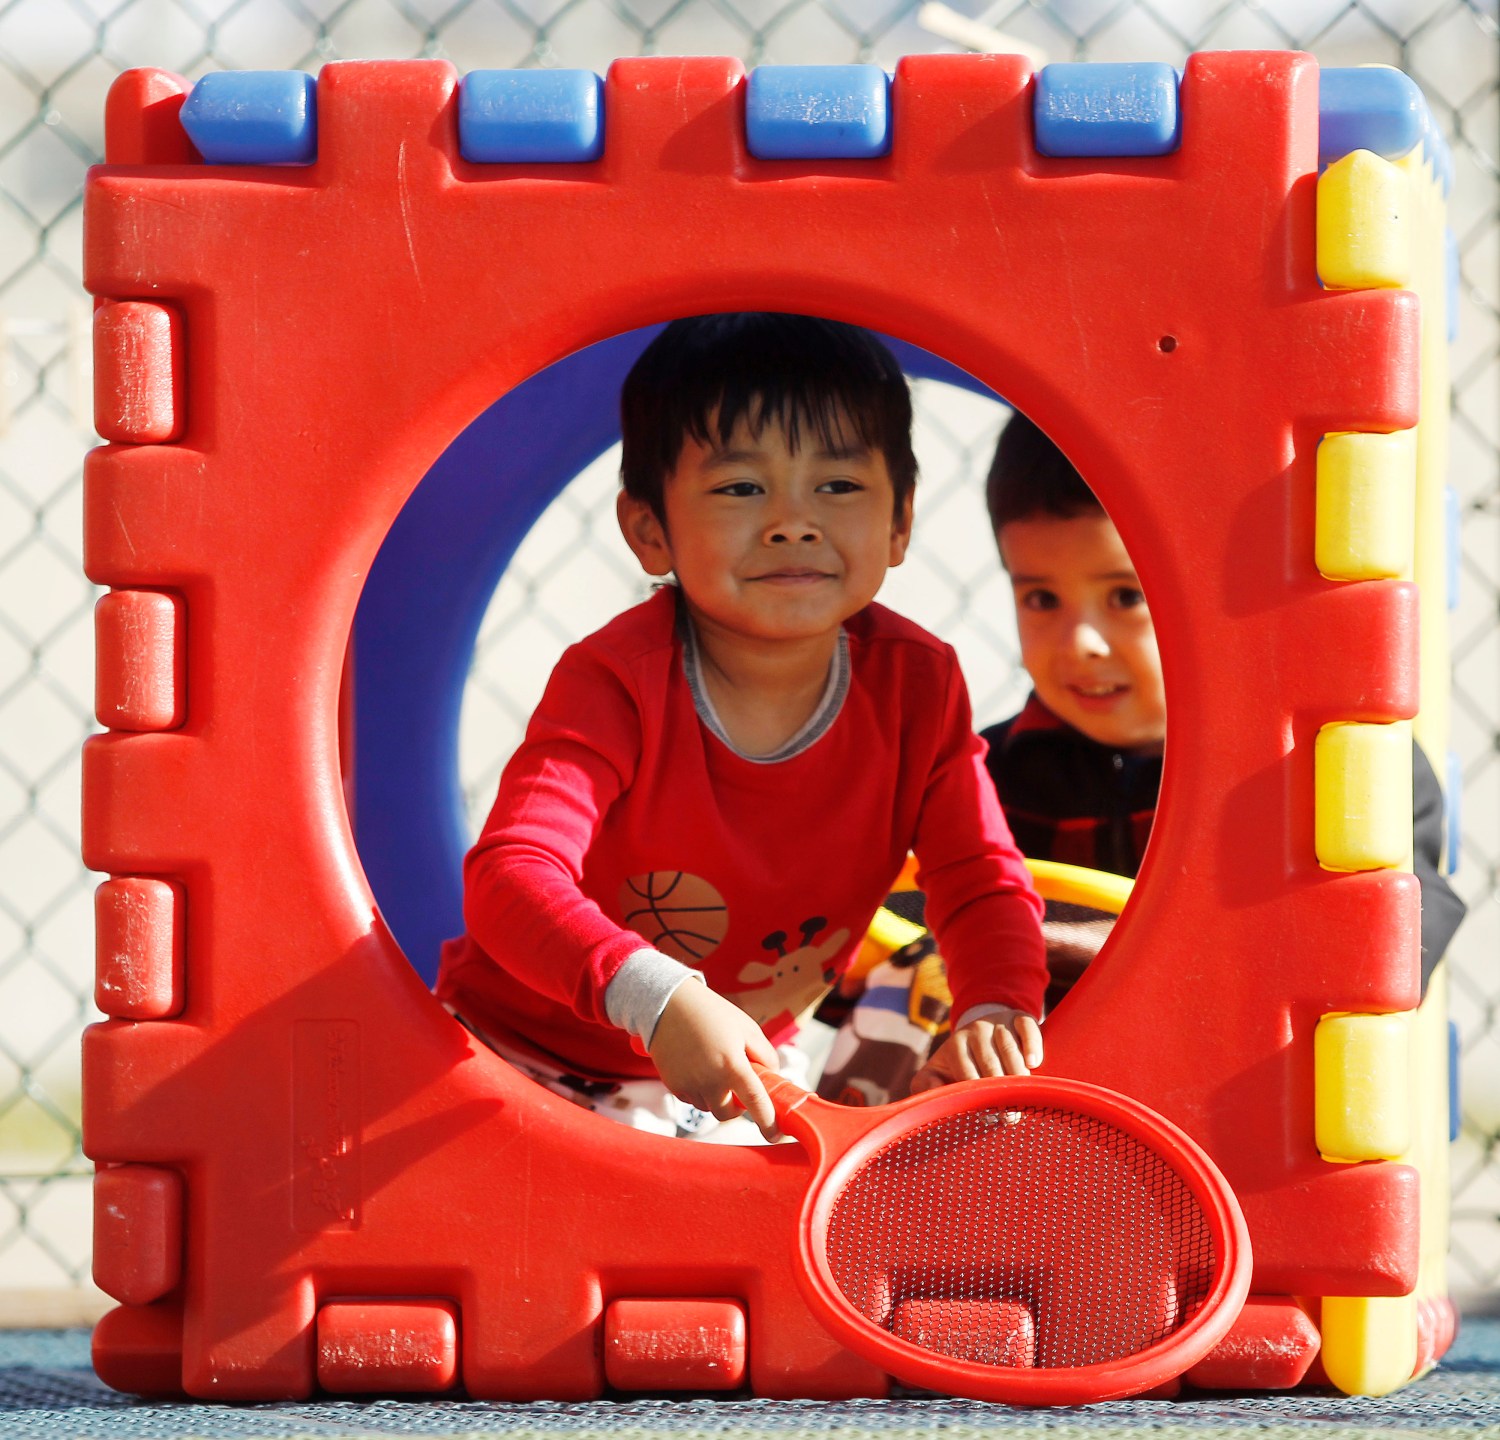 Four-year olds Ryan Htut (L) and Justin Hernandez play in a plastic cube at the Frederick, Maryland Head Start facility March 13, 2012. When officials in Frederick County, Maryland voted last year to stop paying for the local Head Start preschool program, they  pointed to a nearly $12 million projected budget shortfall as proof that the mostly rural county could no longer afford it. Picture taken March 13, 2012. To match story USA-EDUCATION/HEADSTART  REUTERS/Gary Cameron   (UNITED STATES - Tags: EDUCATION POLITICS)